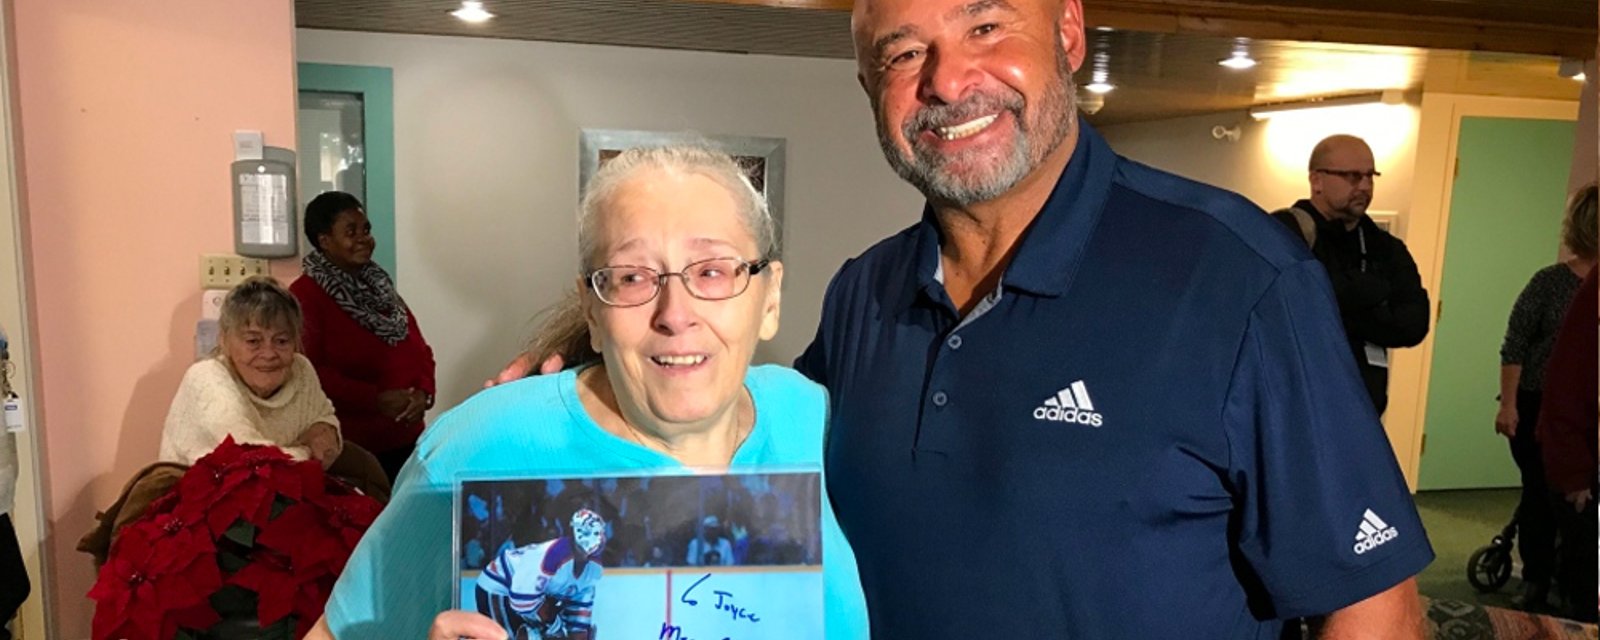 Senior asks for an autographed Grant Fuhr photo and gets a surprise visit from the Oilers legend himself